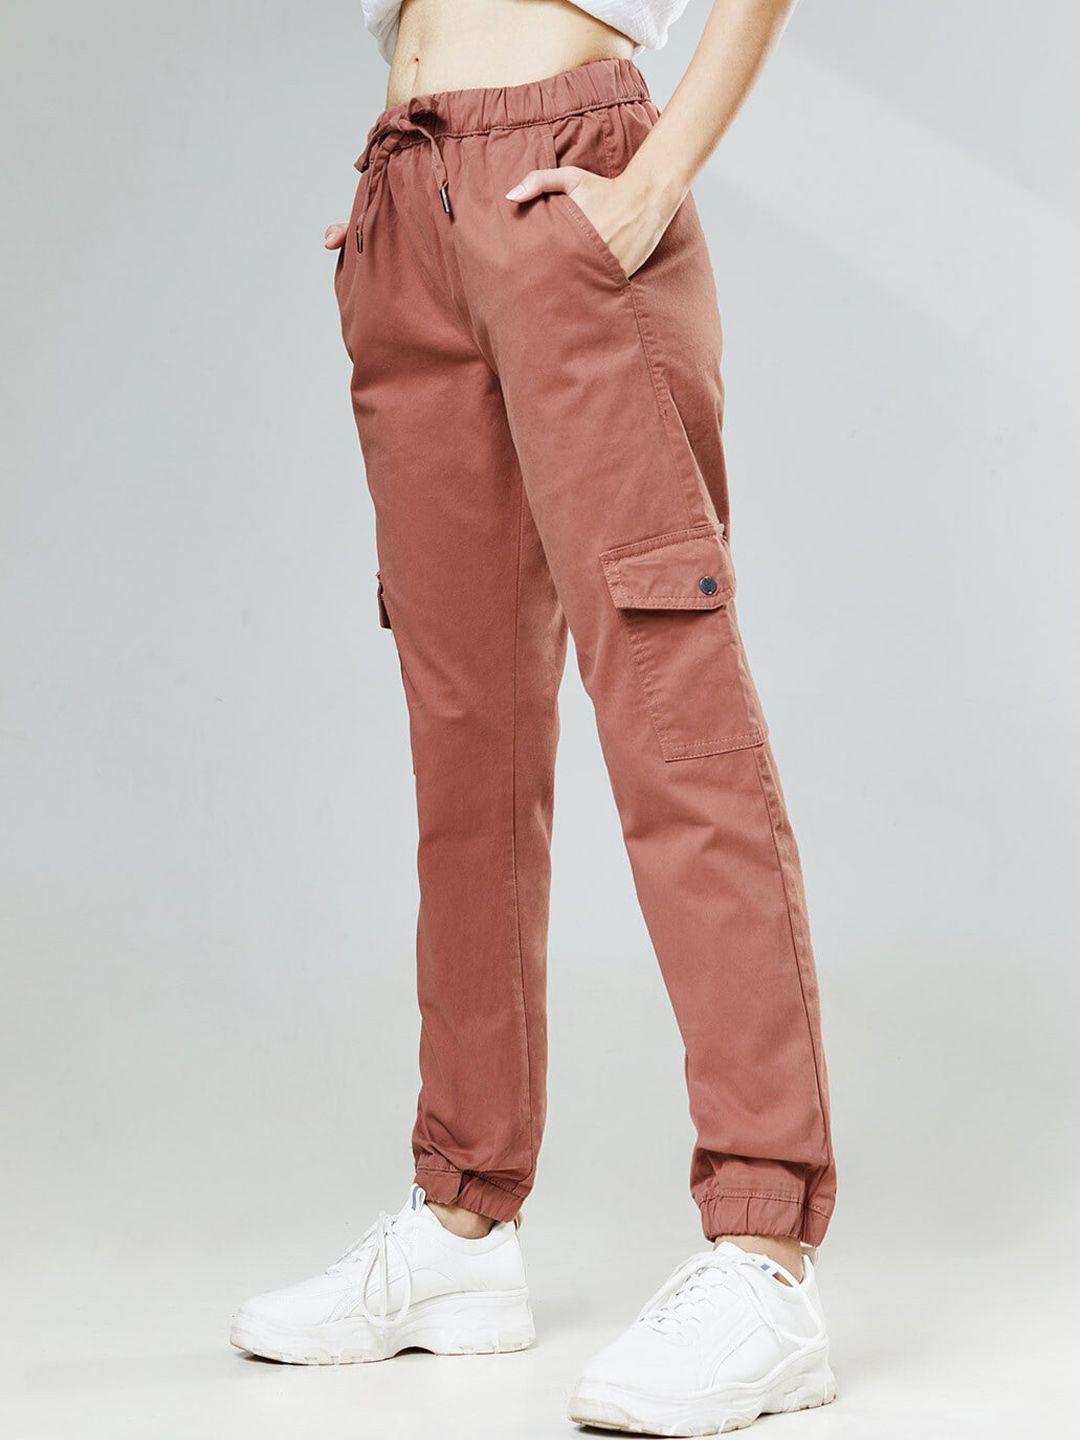 the souled store women solid cargo joggers